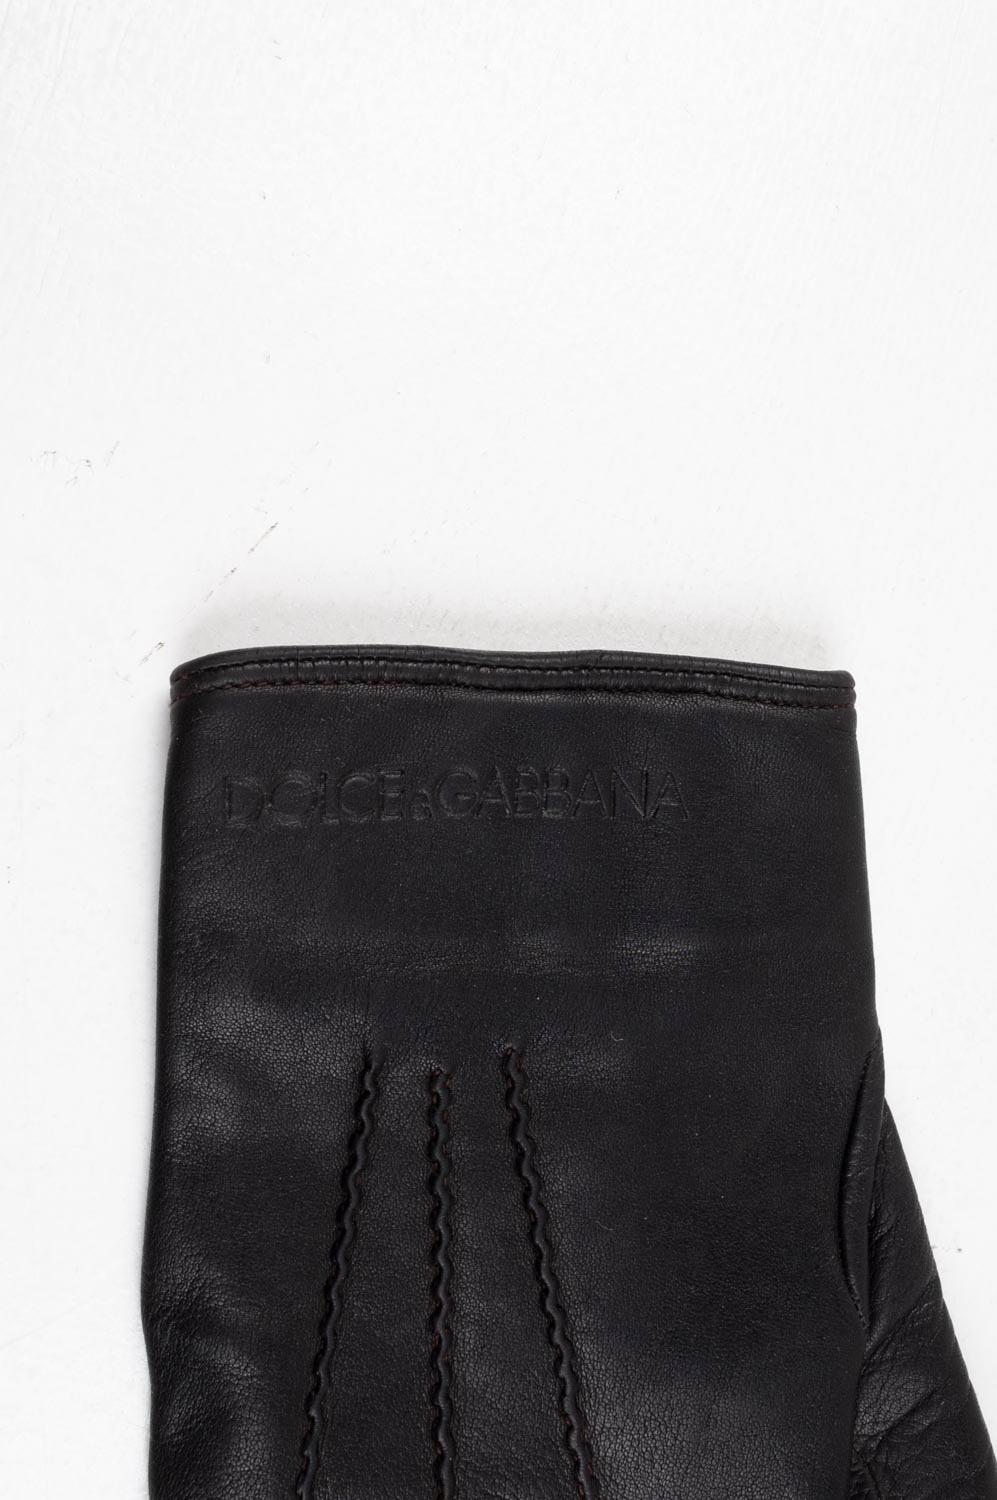 Dolce&Gabbana Leather Men Gloves Size 8.5, S335 In Excellent Condition For Sale In Kaunas, LT